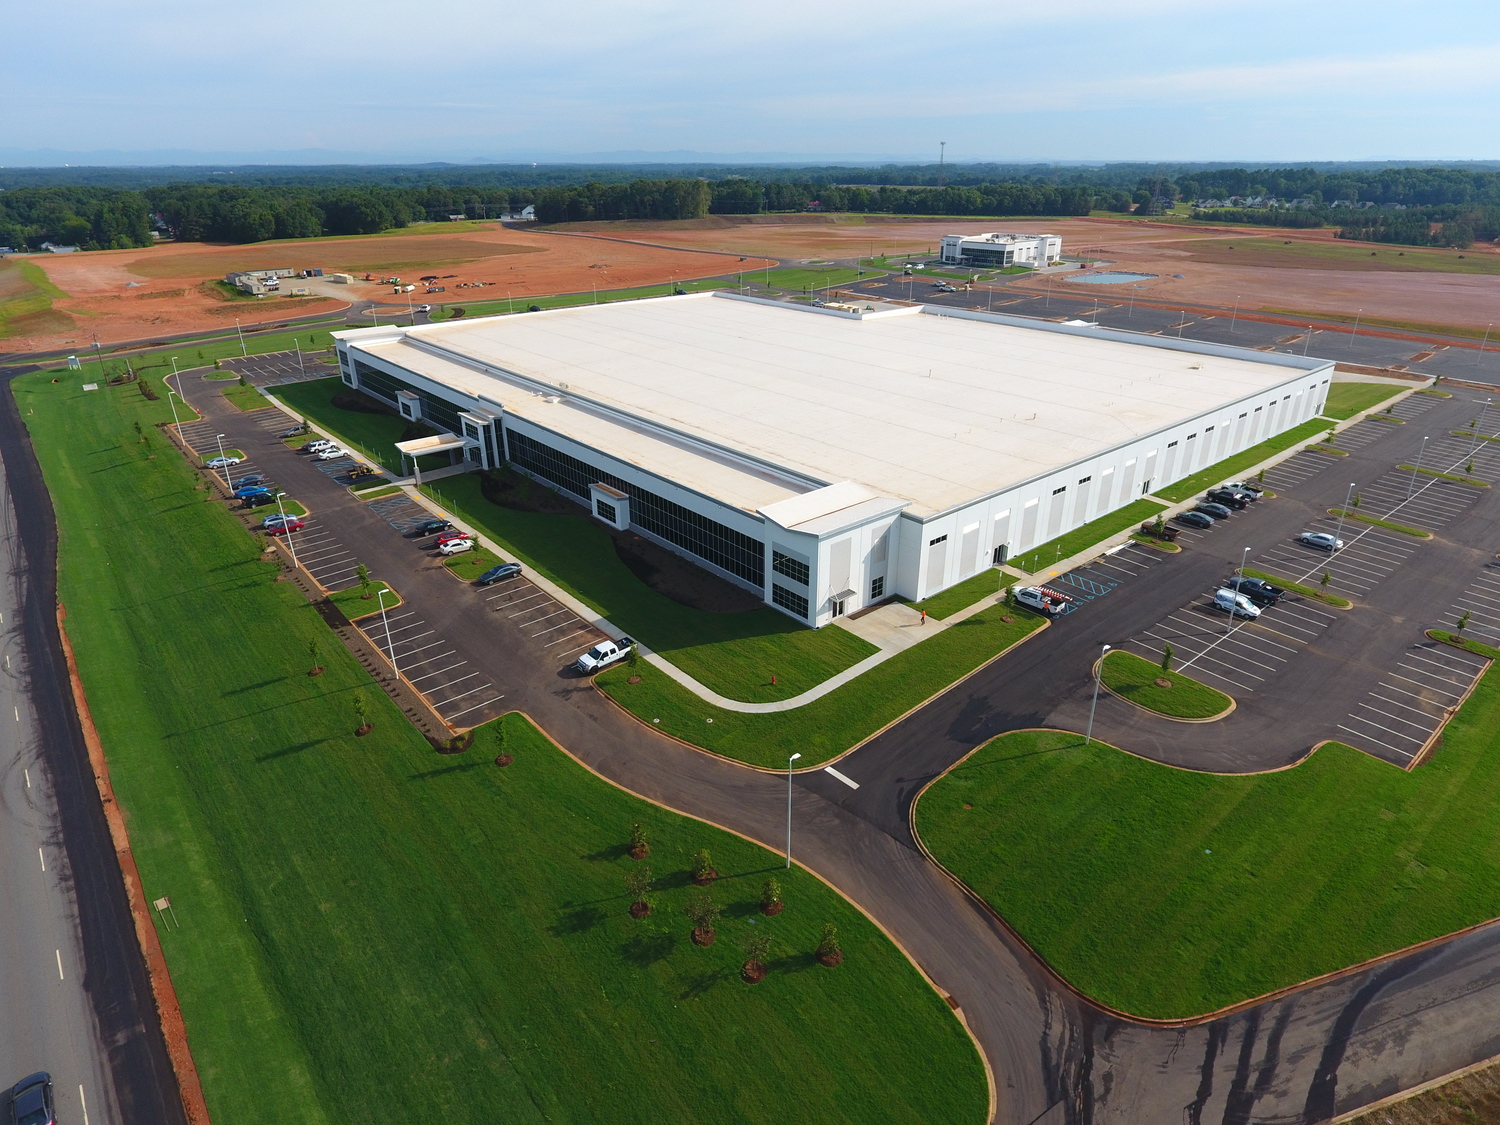 Arthrex AMISC Manufacturing and Central Services Facilities
Anderson, SC 